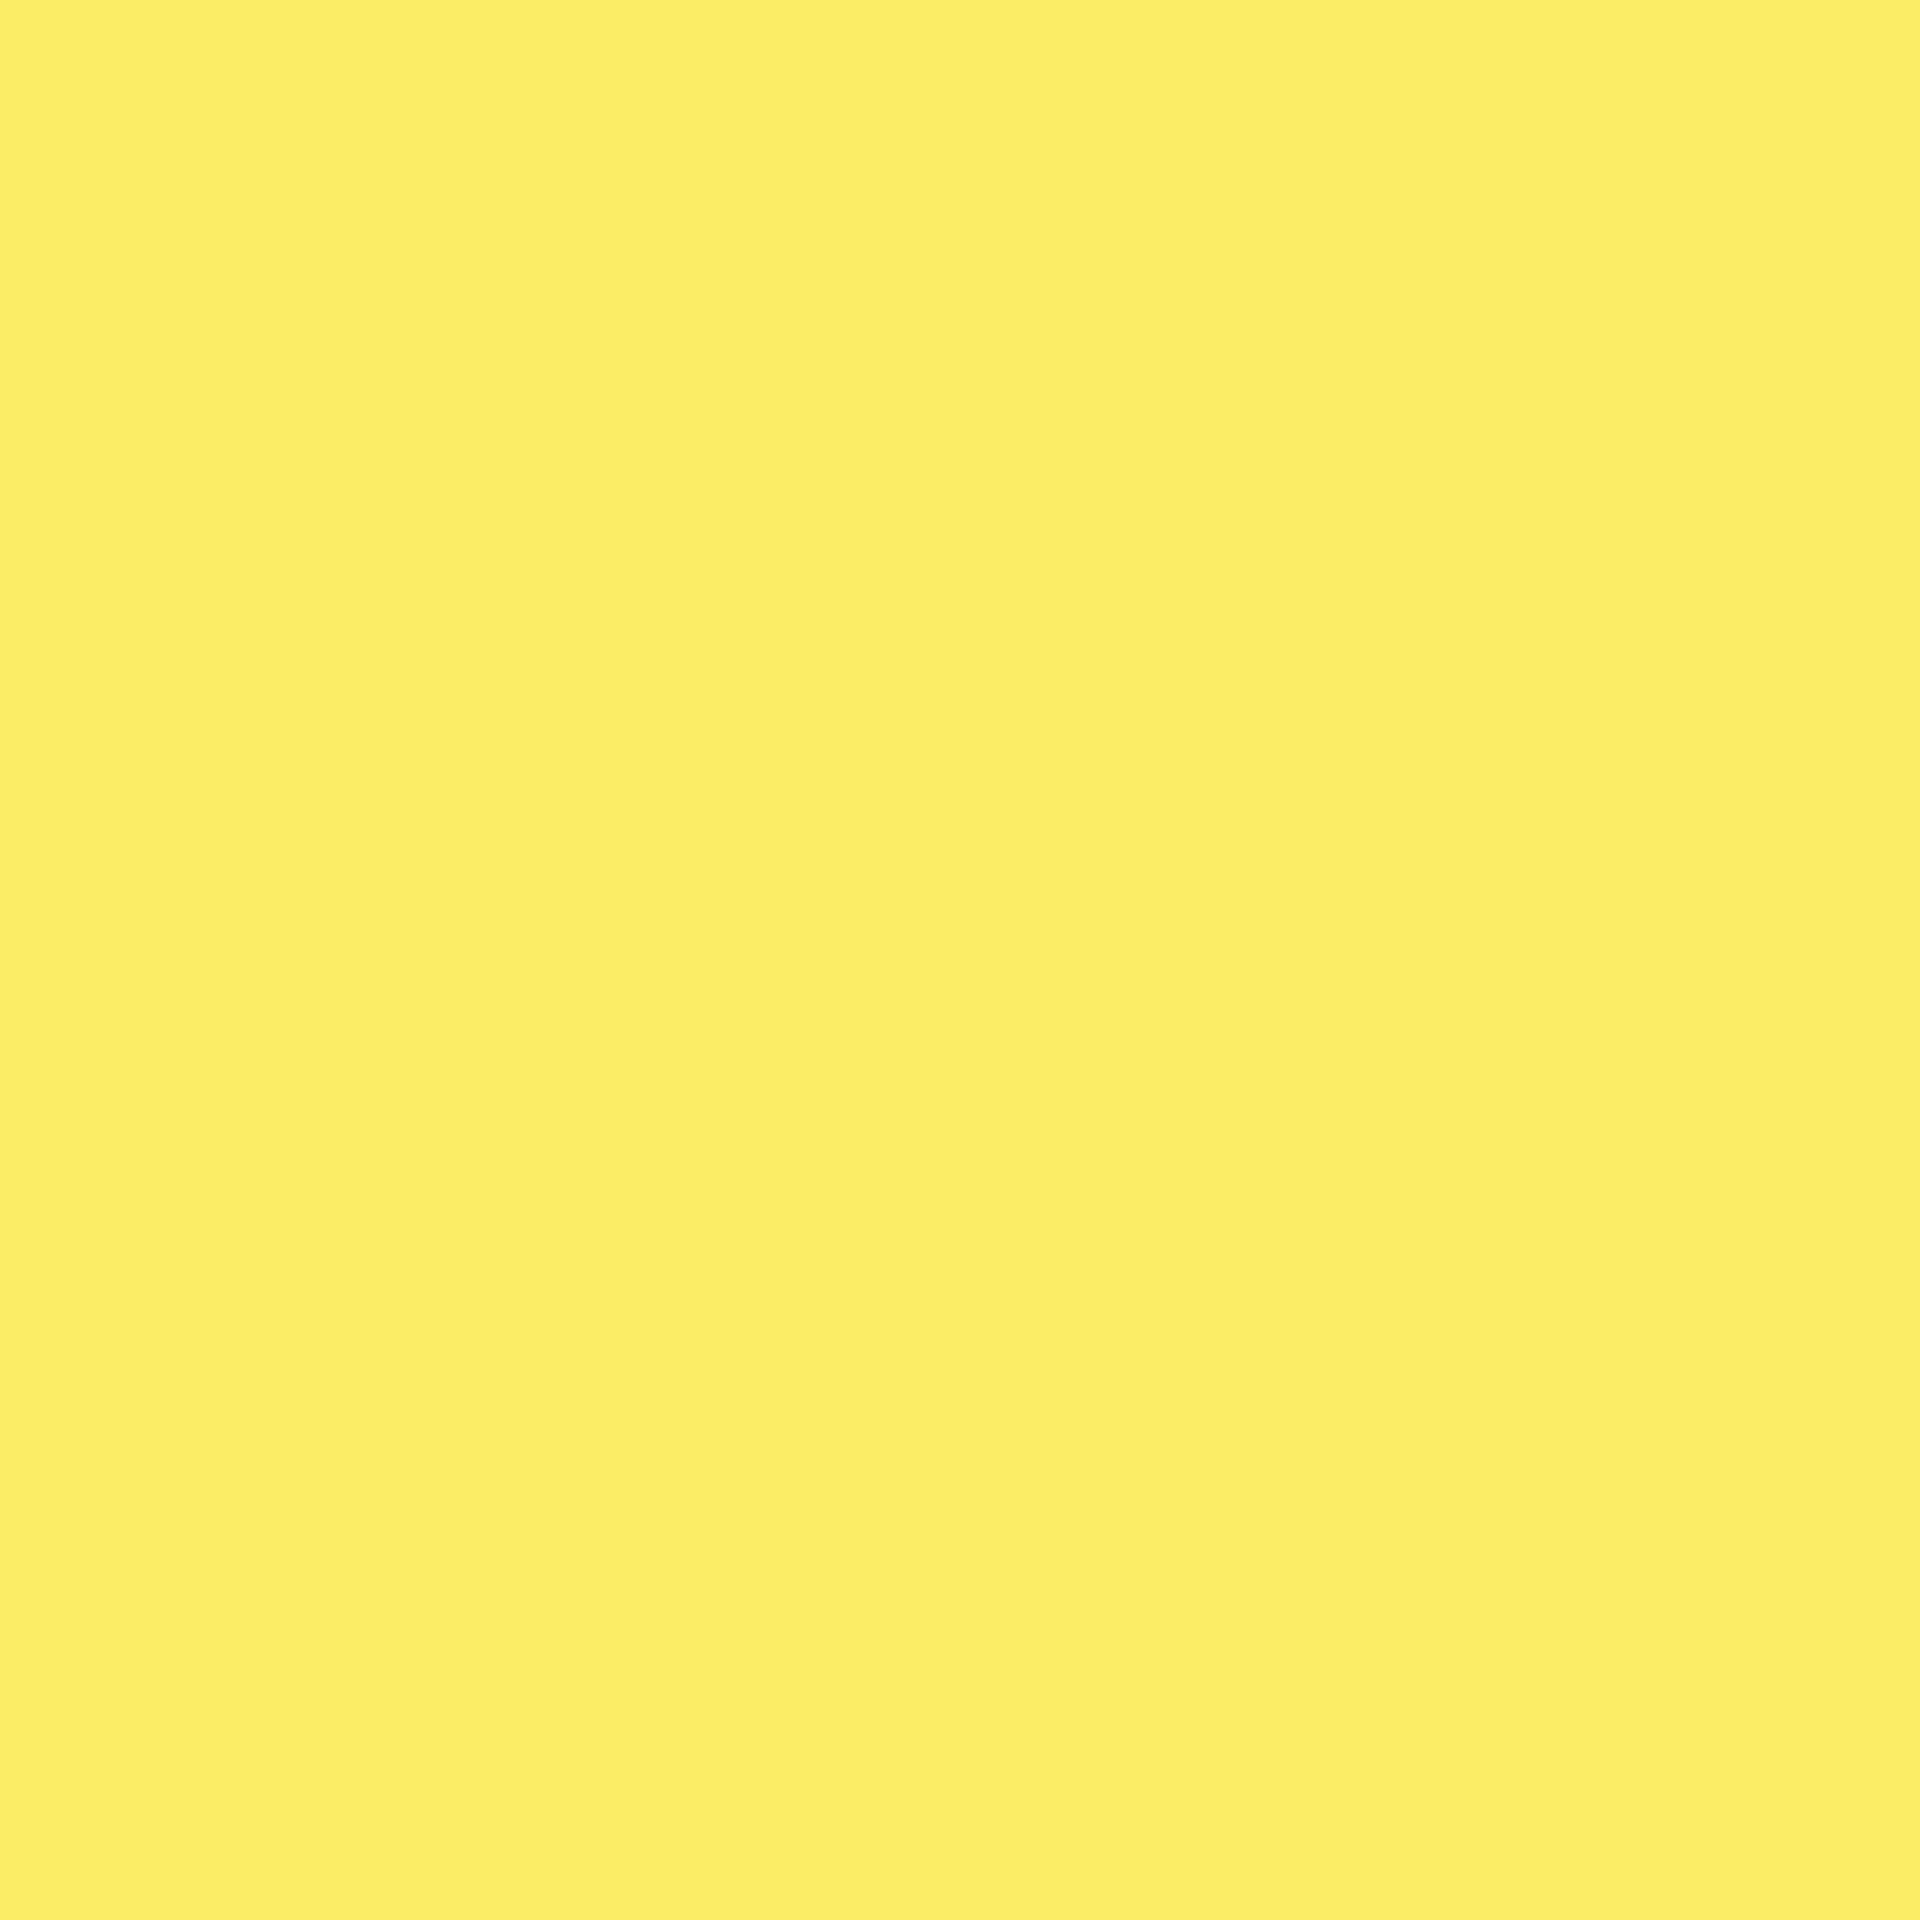 Download free photo of Background,plain,yellow,yellowish,color - from  